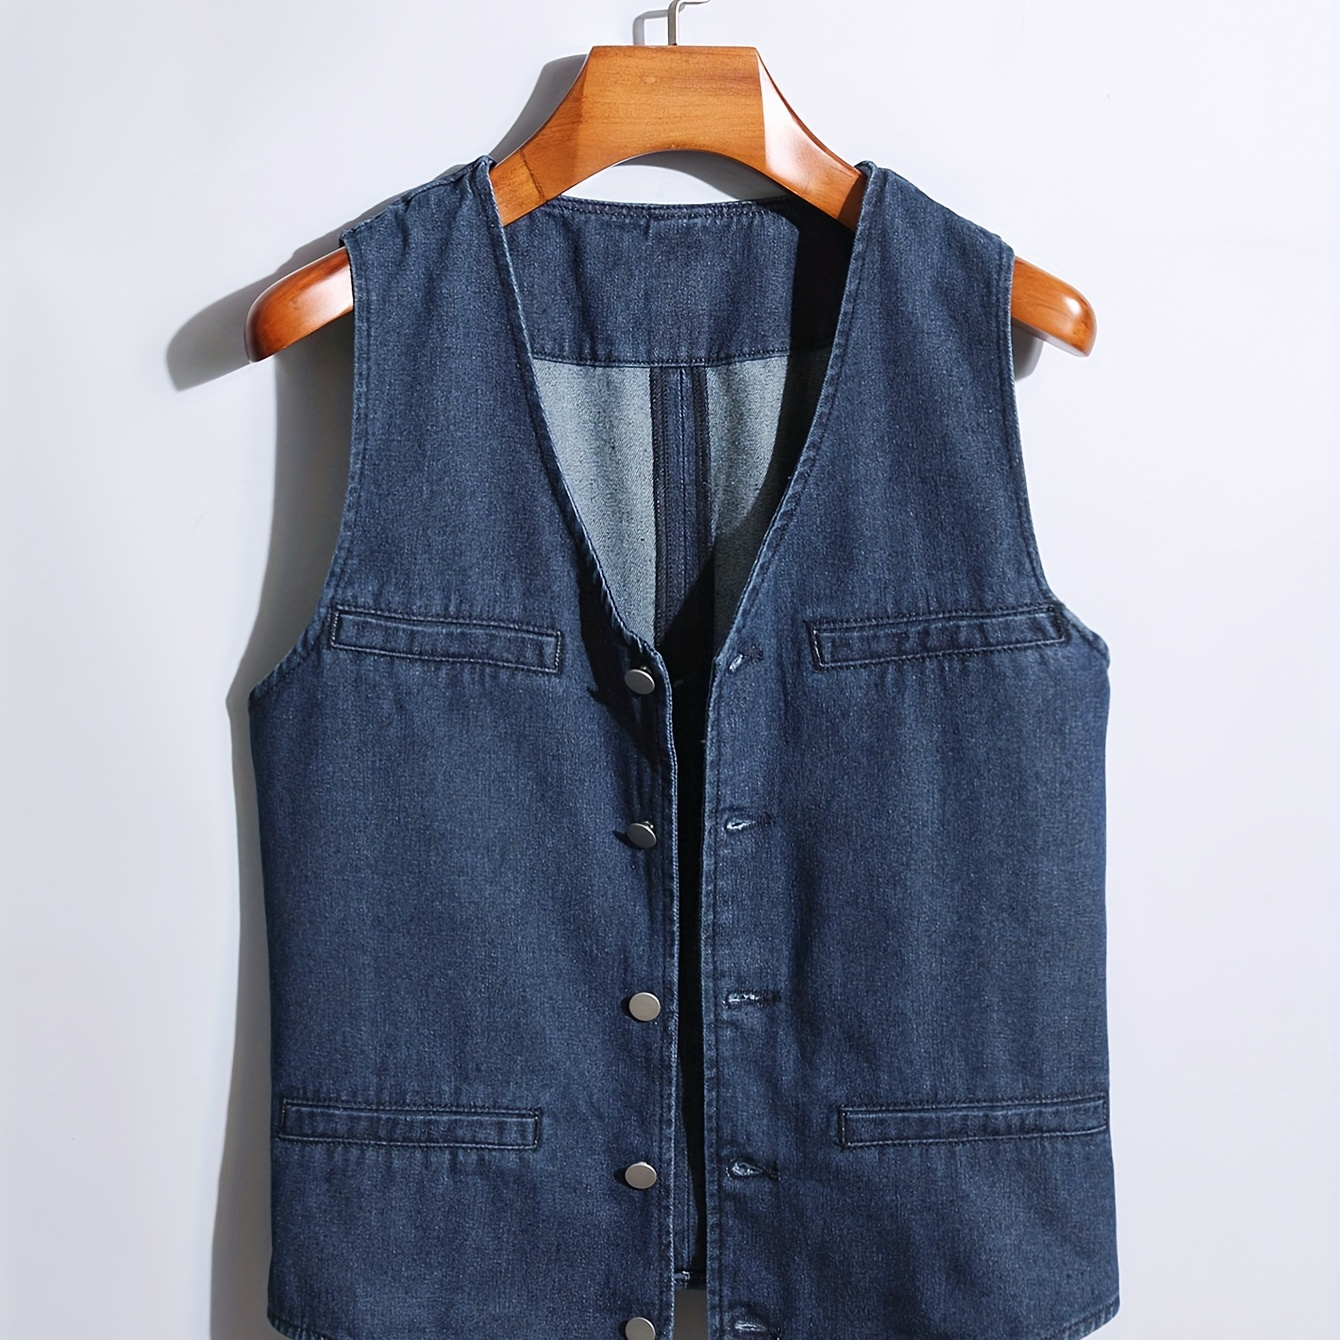 

Men's Solid Casual Denim Vest, Button Up Front Sleeveless Vest With Adjustable Back Strap For Daily Wear